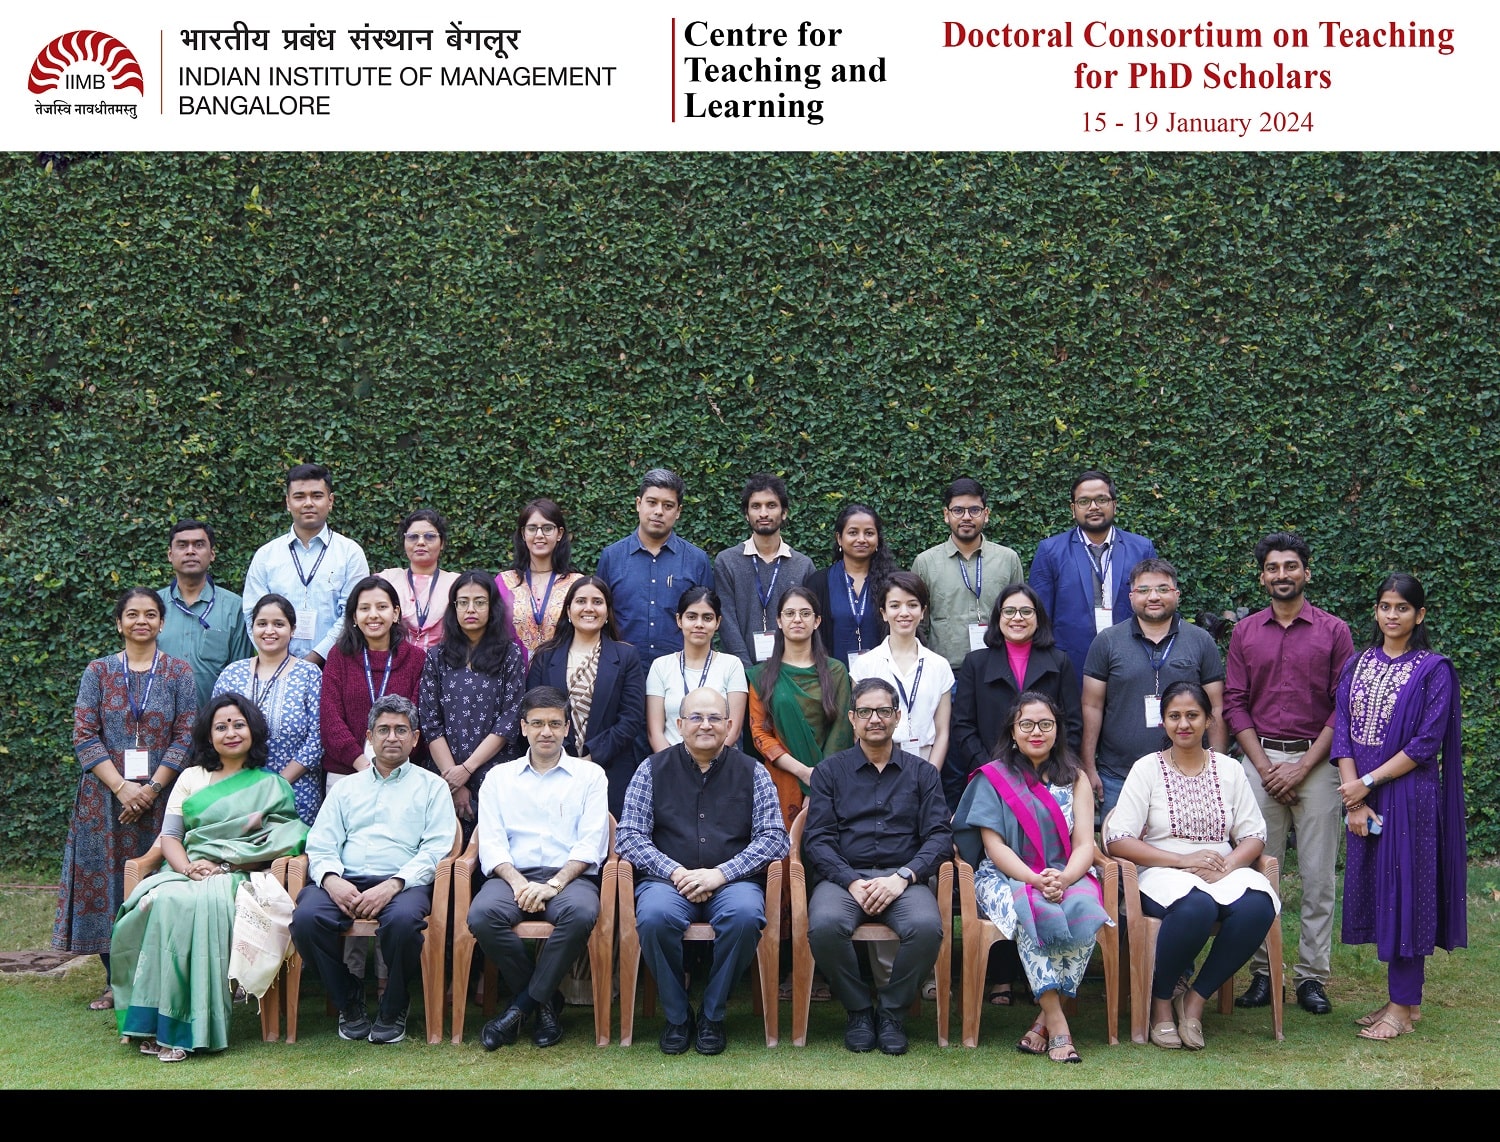 At the centre, Prof. Rishikesha Krishnan, Director of IIM Bangalore.   To his right, Prof. Sushanta Mishra, Chairperson, Centre for Teaching and Learning and CTL team members.   To his left, Prof. Sourav Mukherji, Faculty of OBHRM area, Prof. Ananth Krishnamurthy, Chairperson of the Doctoral Programme at IIMB, and Lopamudra Dewan, Manager of CTL. 